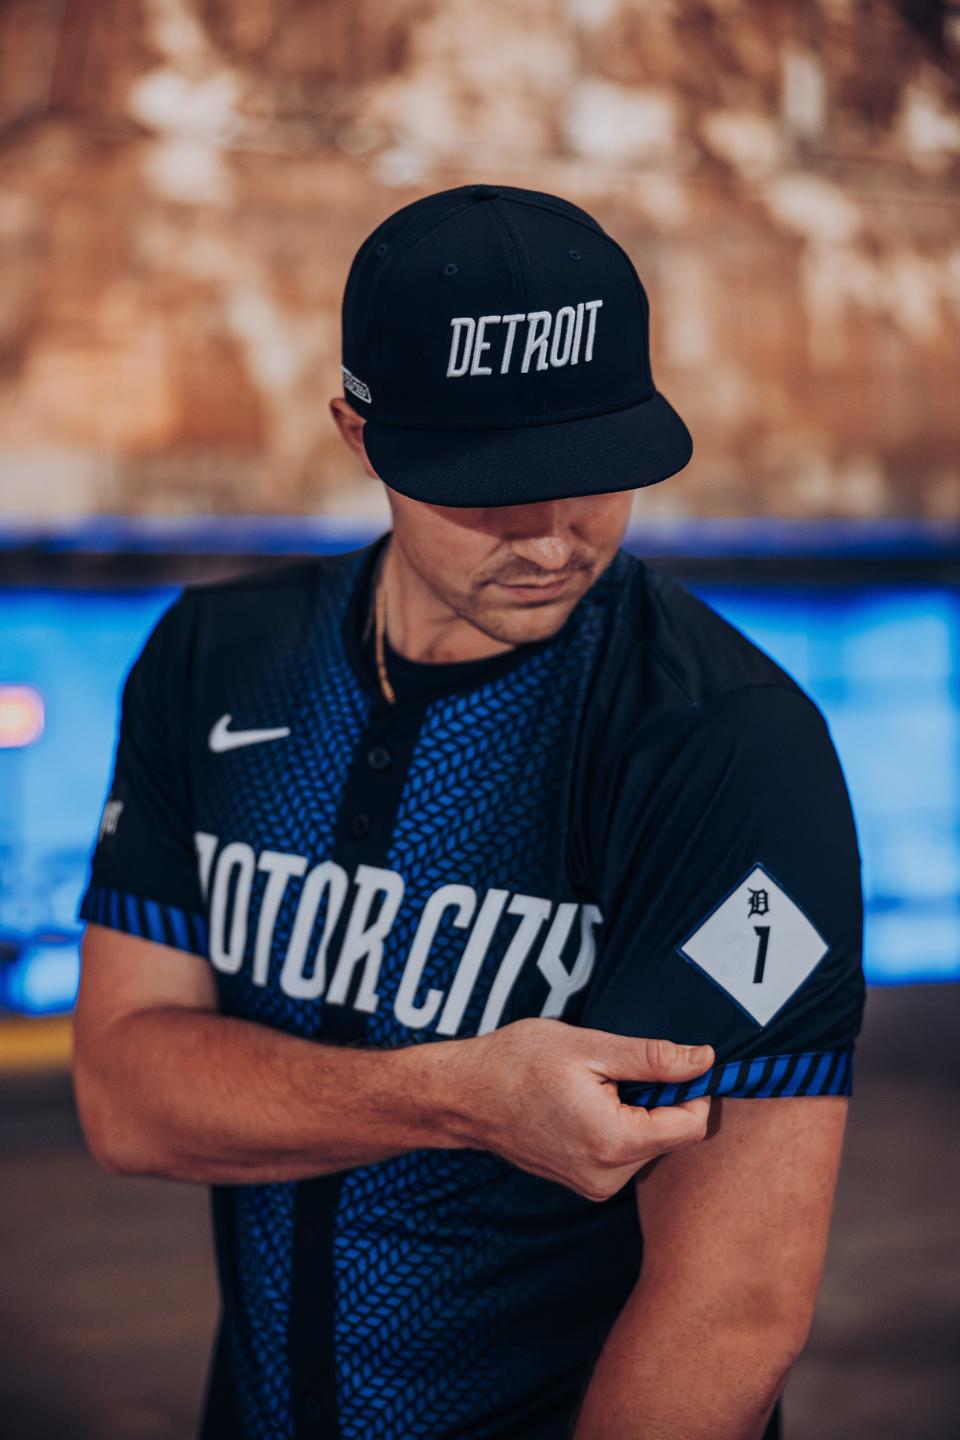 Detroit Tigers' City Connect uniforms hit the street with plenty of